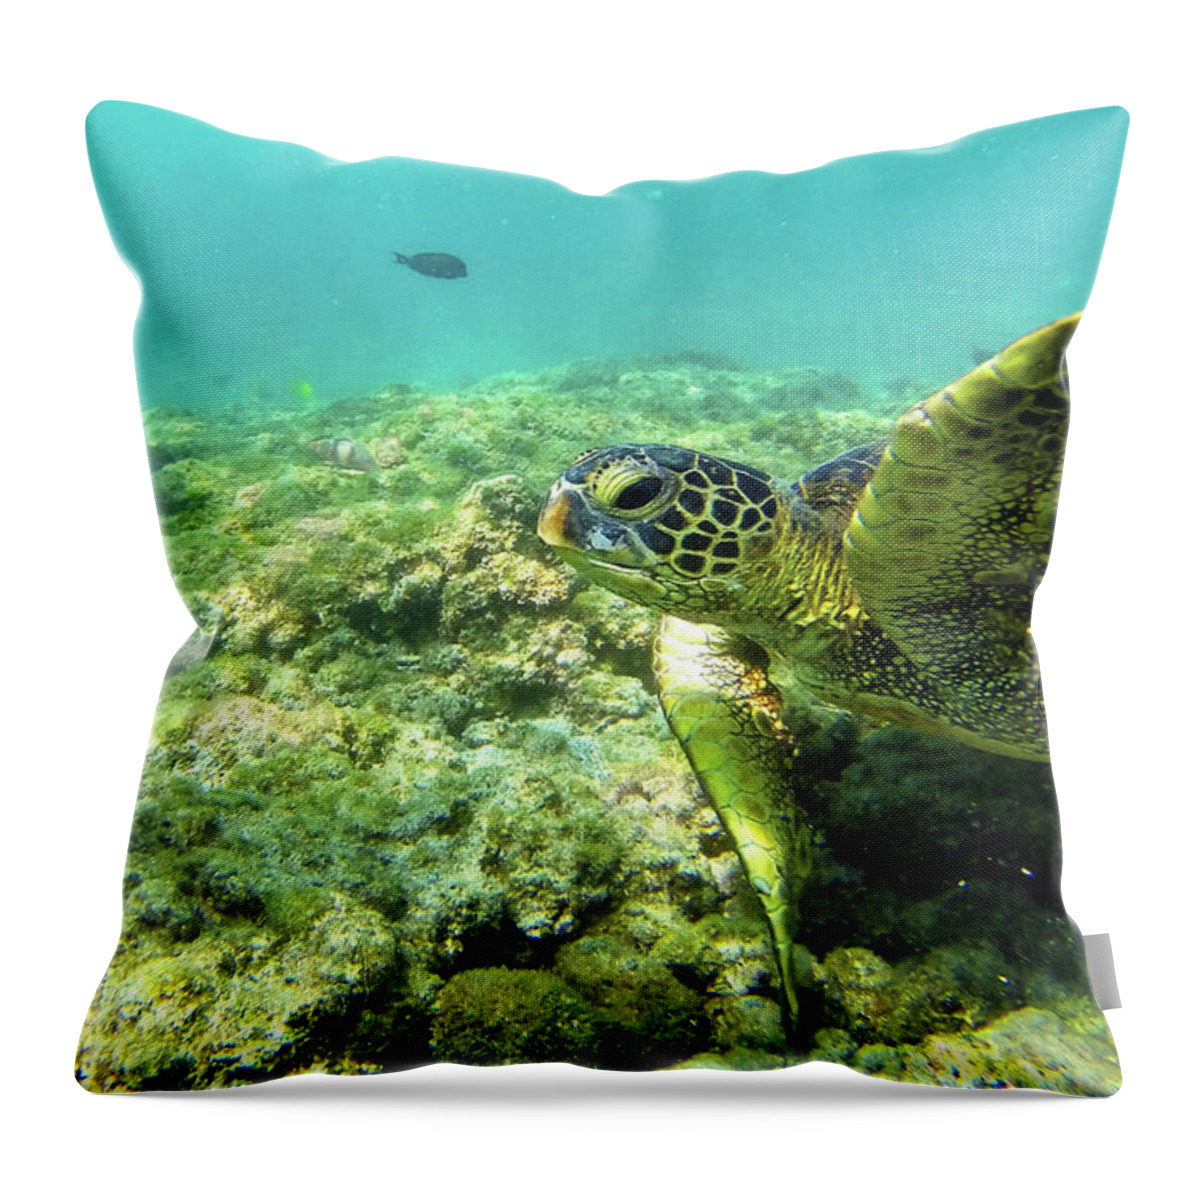 Underwater Throw Pillow featuring the photograph Sea Turtle #2 by Anthony Jones